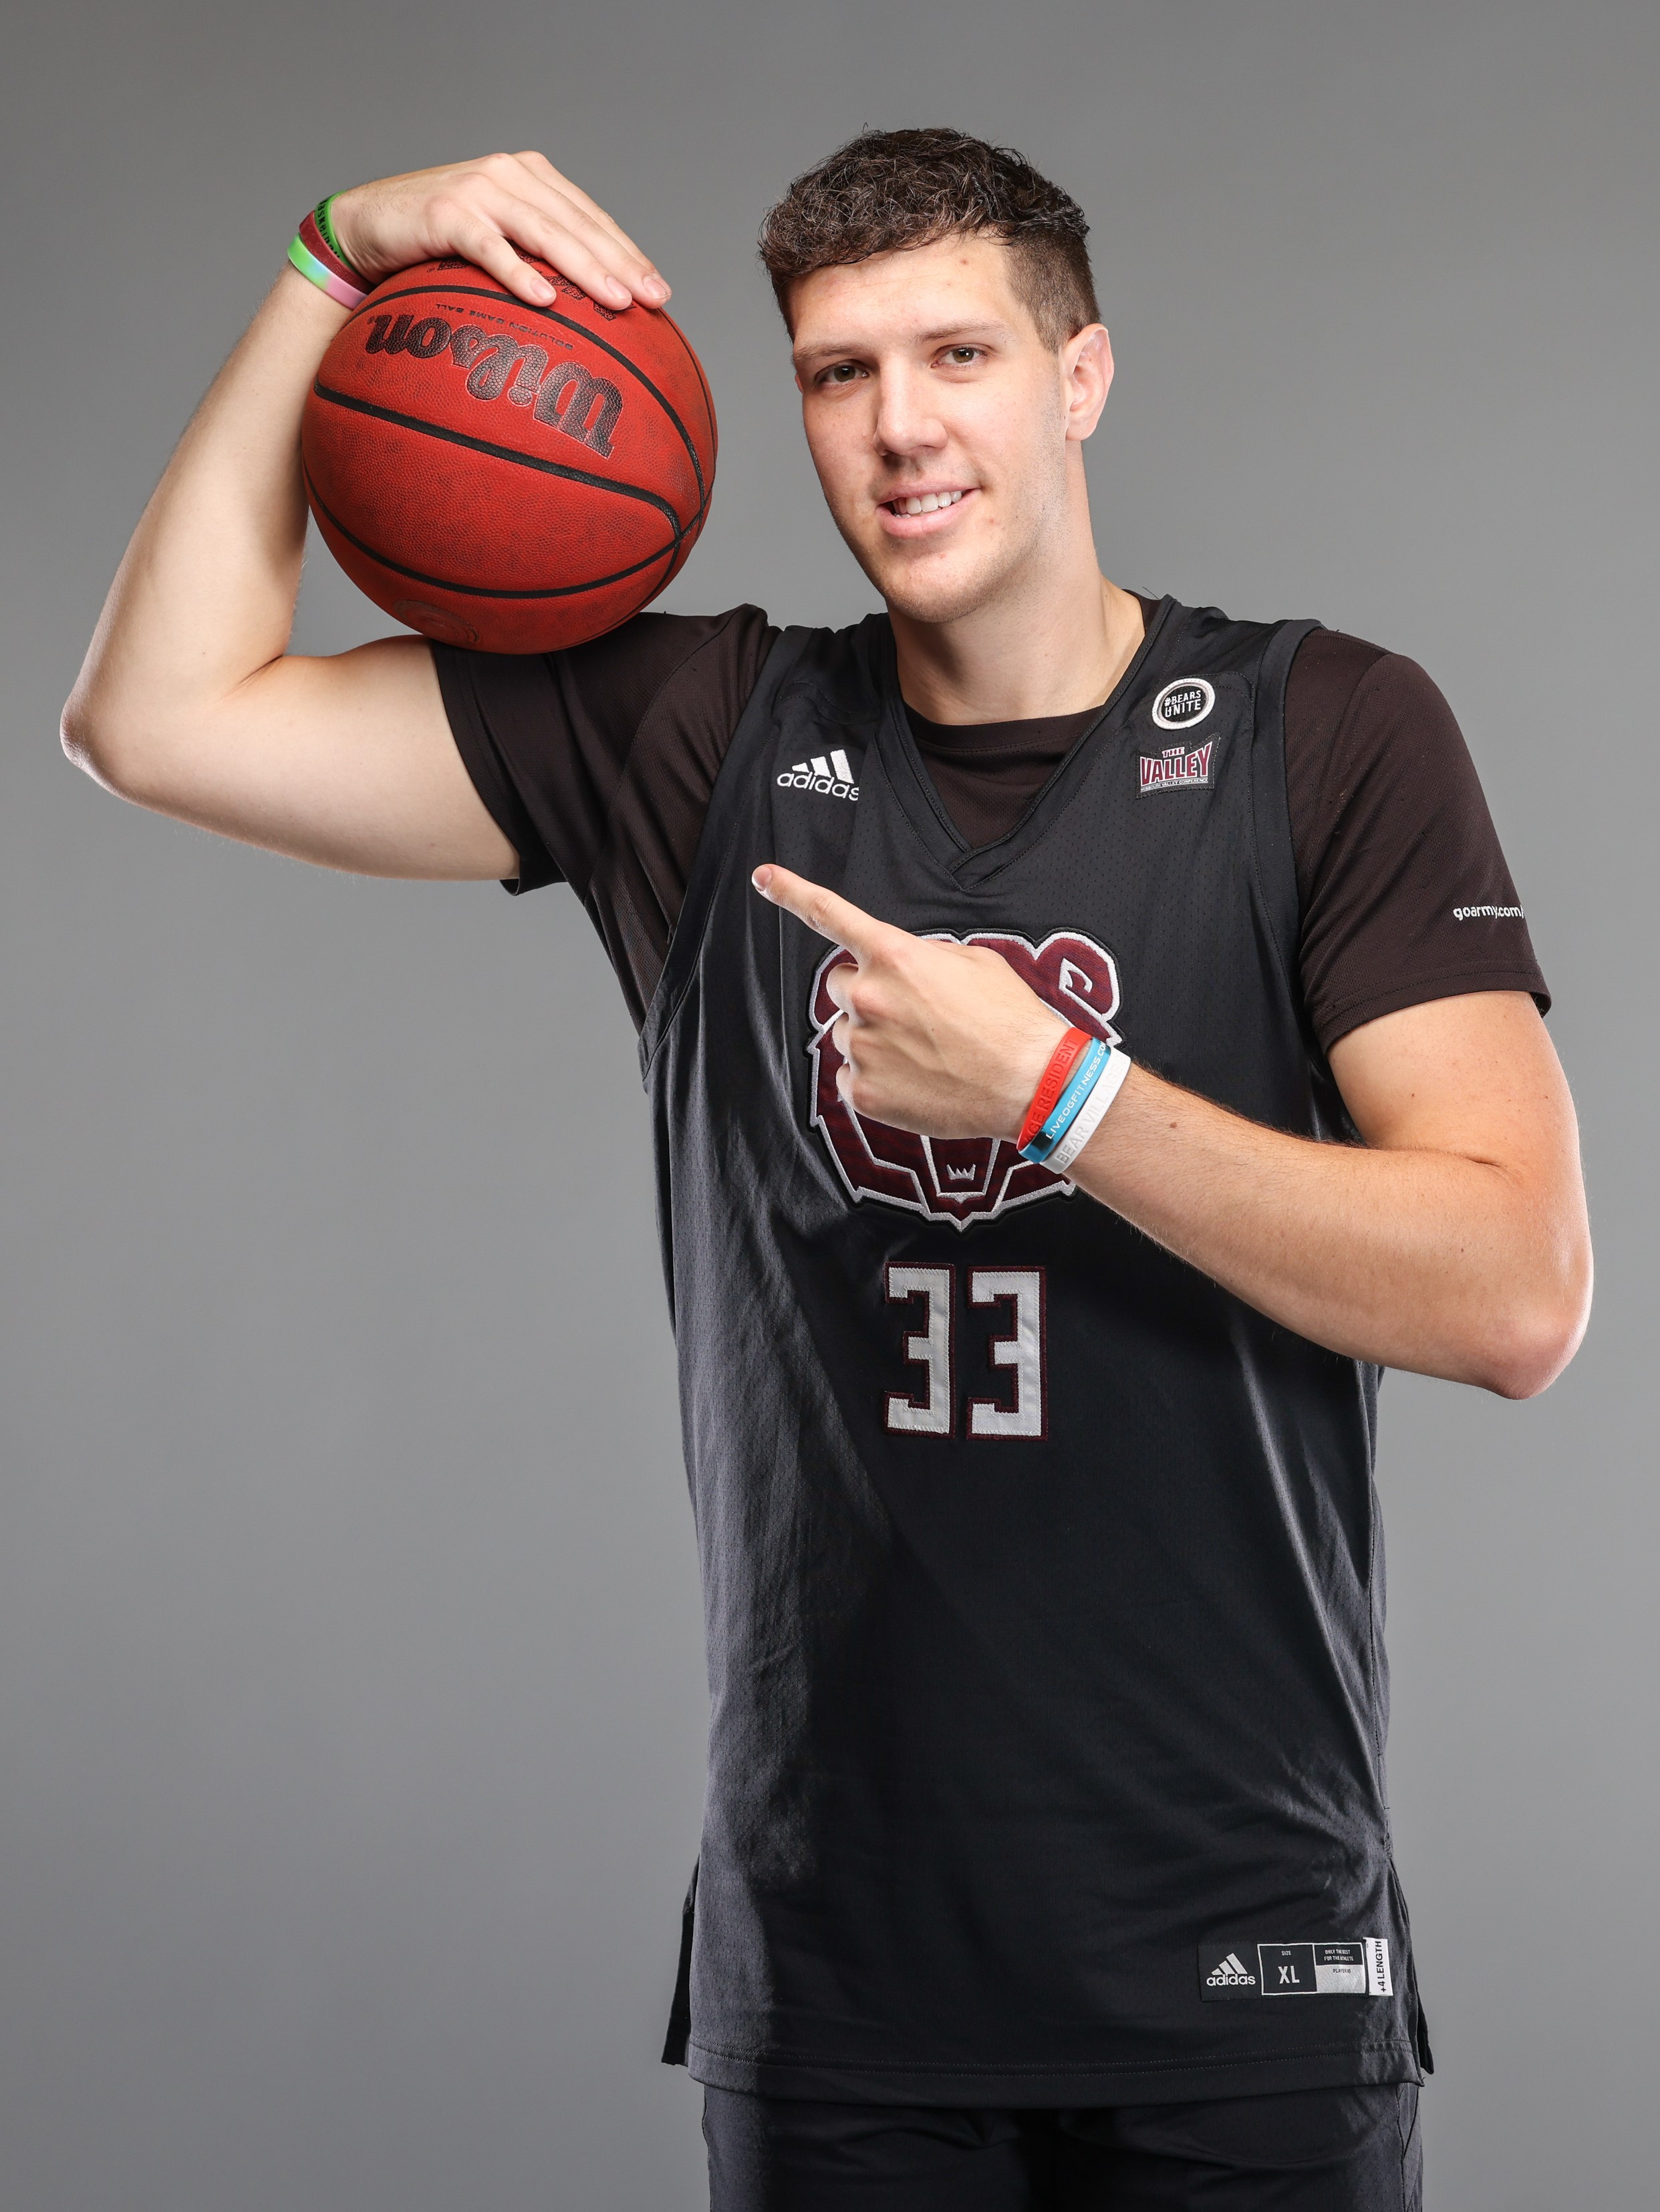 A basketball player poses for a photo while holding a basketball on his shoulder